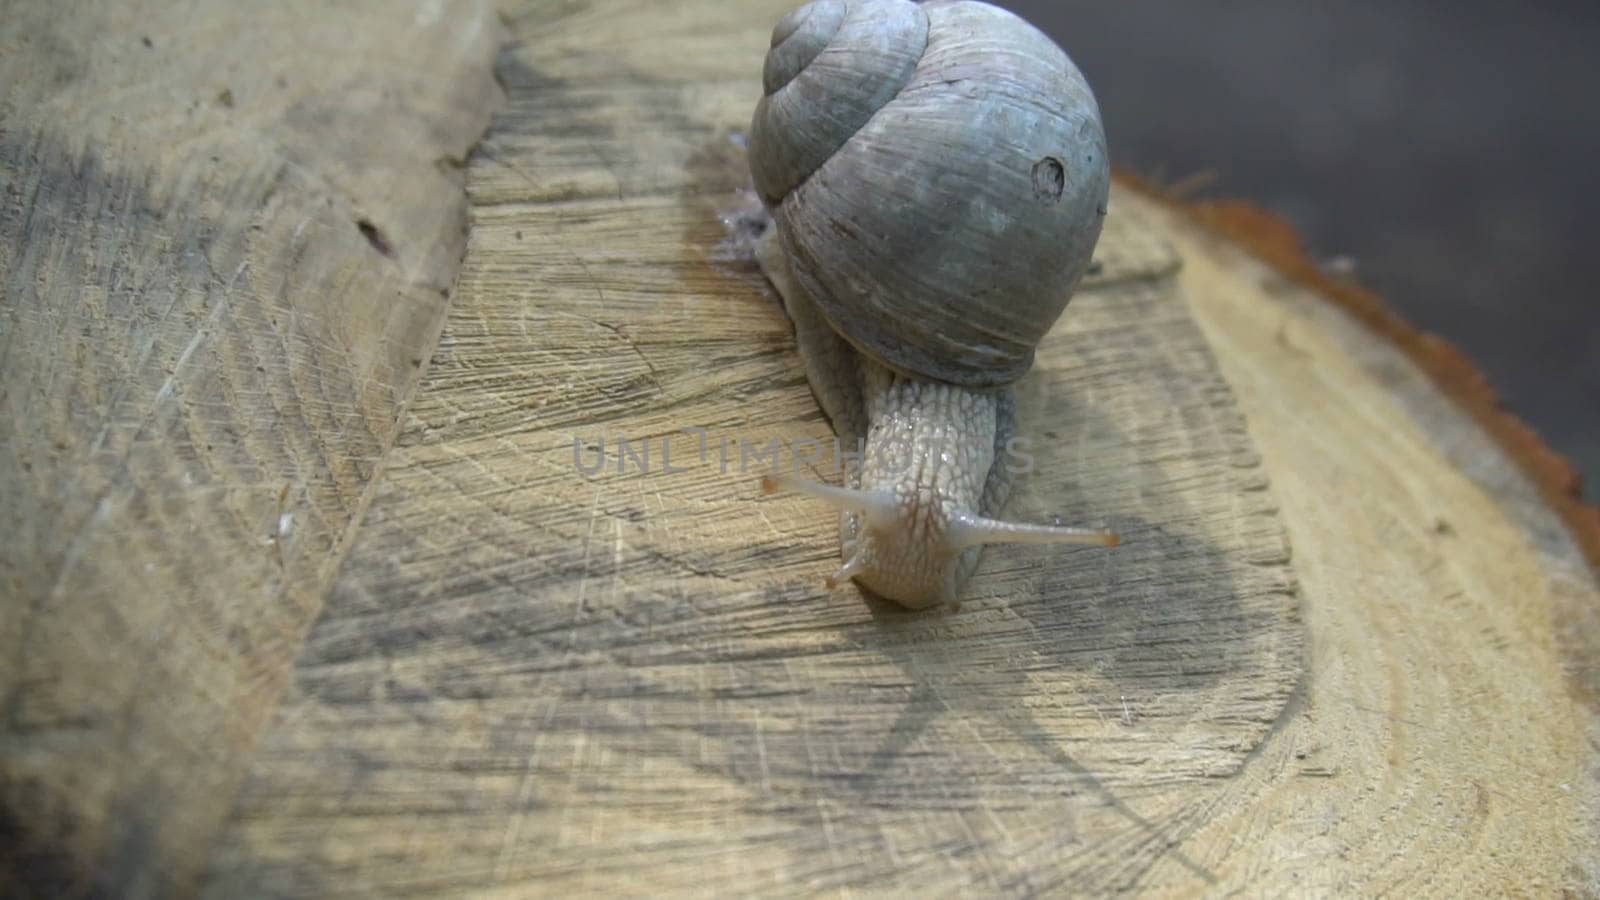 High quality video of snail on the tree stump in 4K.